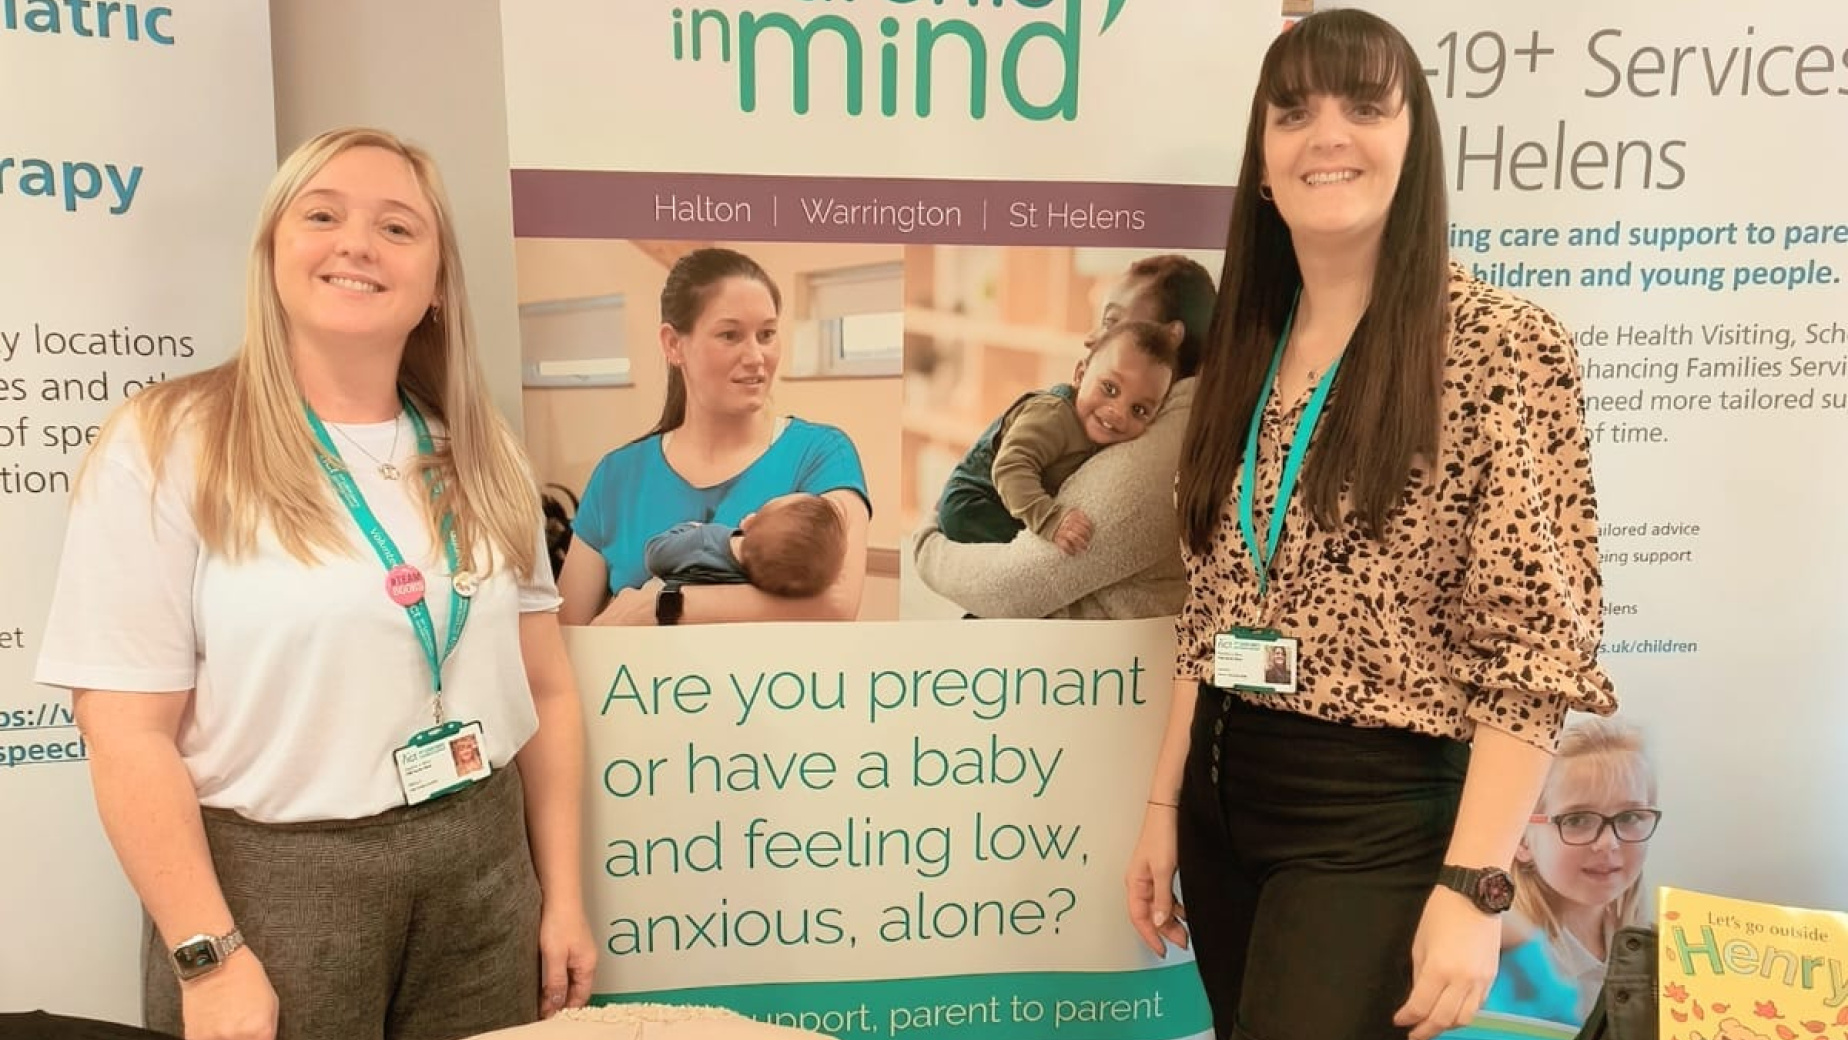 Volunteers at a NCT Parents in Mind promotional stand